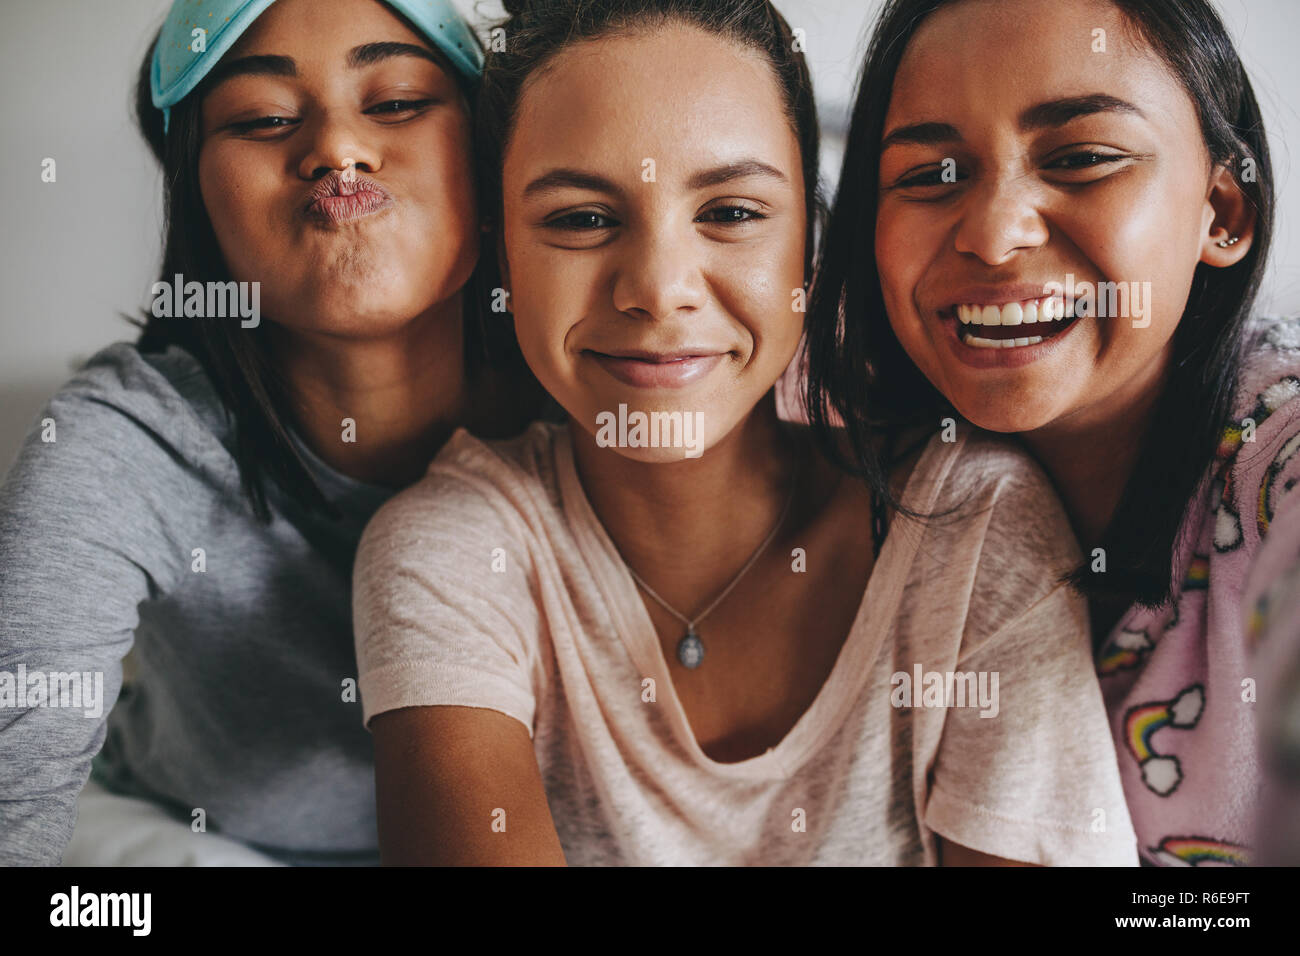 Three young girls sitting together posing for a selfie during a sleepover. Girls having a good time during a sleepover. Stock Photo